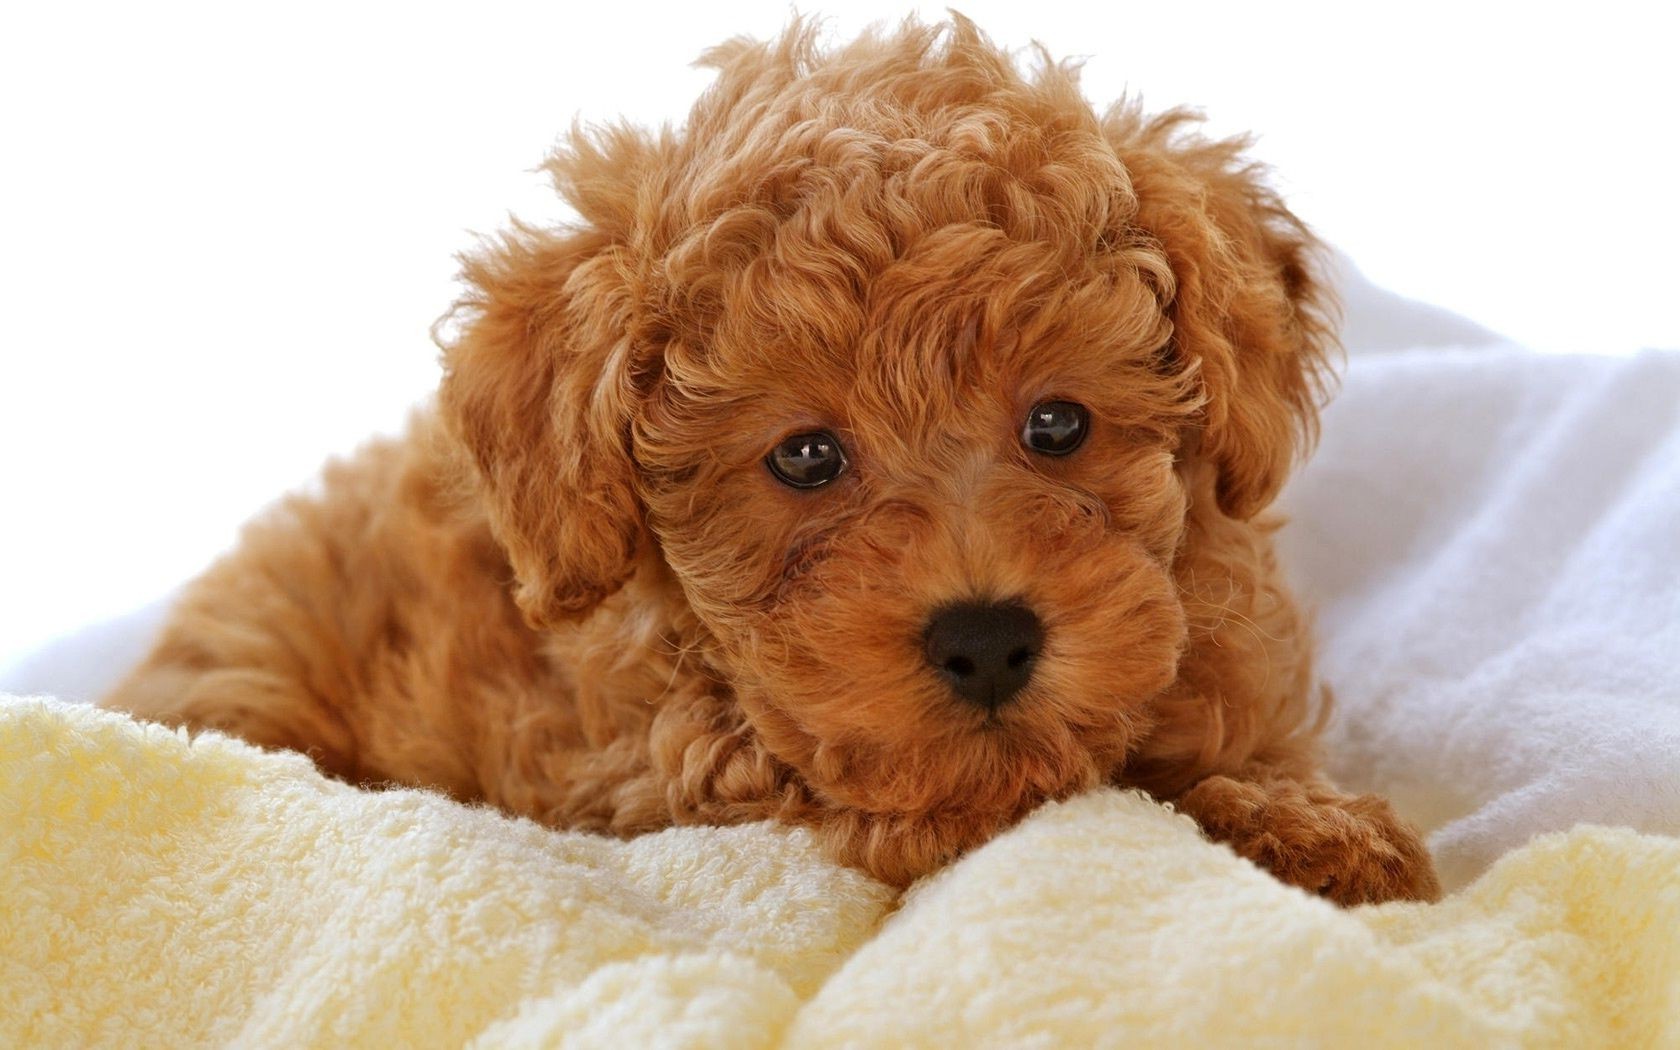 dogs cute downy fur domestic dog pet poodle mammal animal little sit puppy canine isolated breed funny